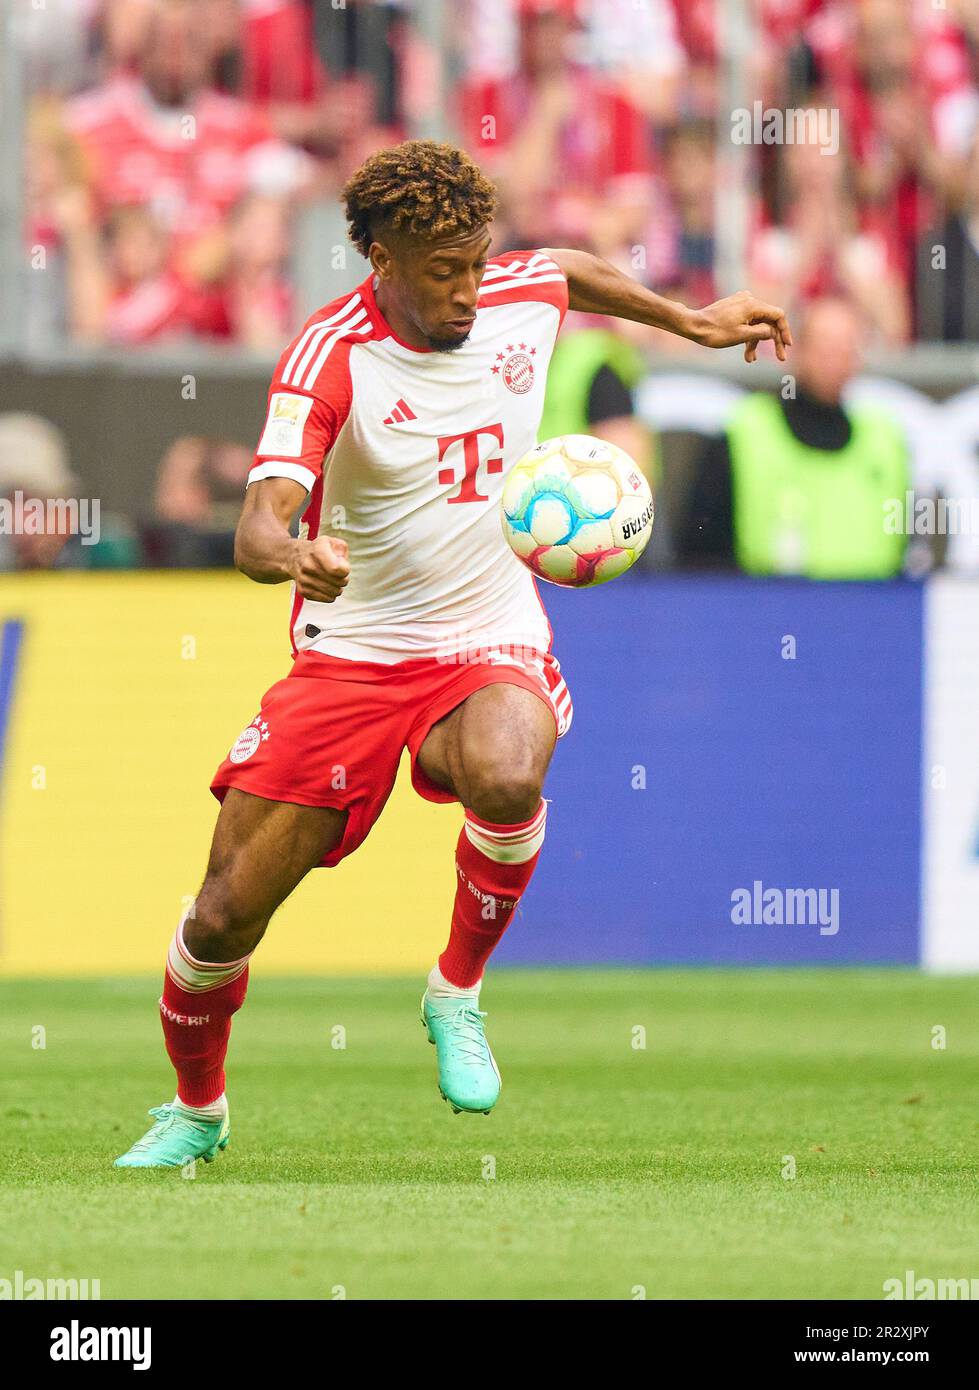 Kingsley Coman, FCB 11   in the match FC BAYERN MUENCHEN - RB LEIPZIG 1-3 1.German Football League on May 20, 2023 in Munich, Germany. Season 2022/2023, matchday 33, 1.Bundesliga, FCB, München, 33.Spieltag. © Peter Schatz / Alamy Live News    - DFL REGULATIONS PROHIBIT ANY USE OF PHOTOGRAPHS as IMAGE SEQUENCES and/or QUASI-VIDEO - Stock Photo